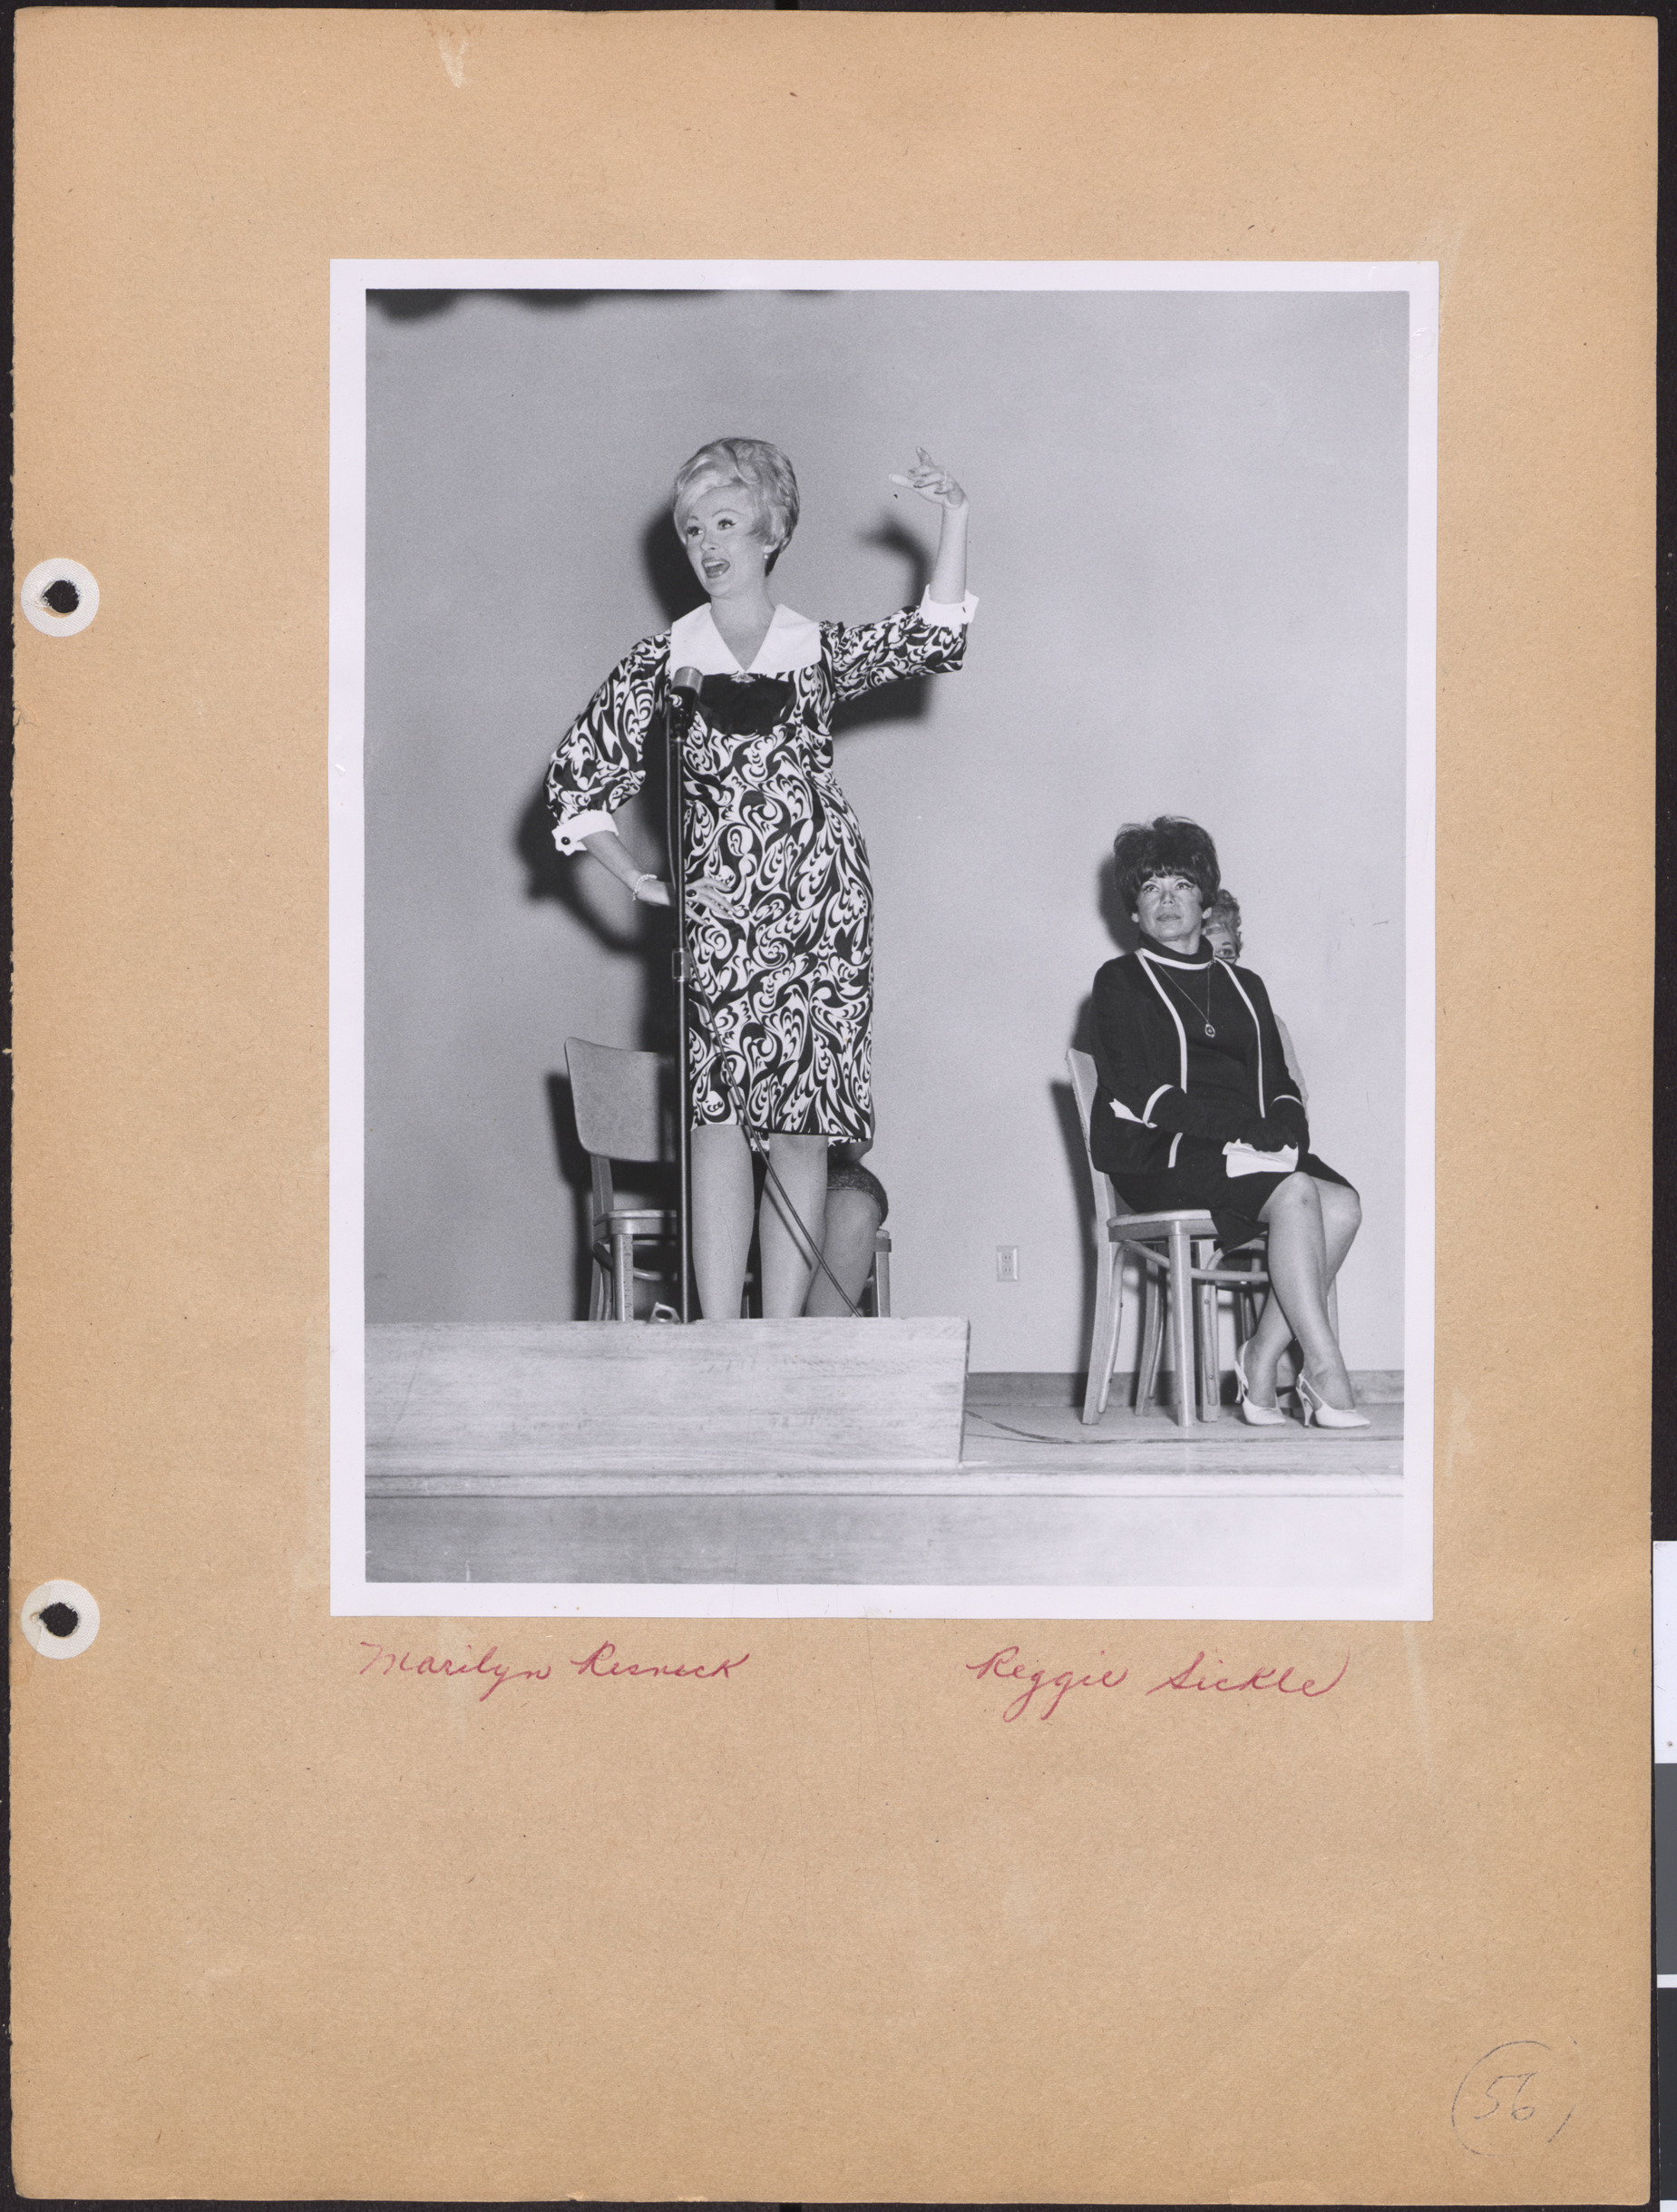 Photograph of Marilyn Resnick and Reggie Sickle